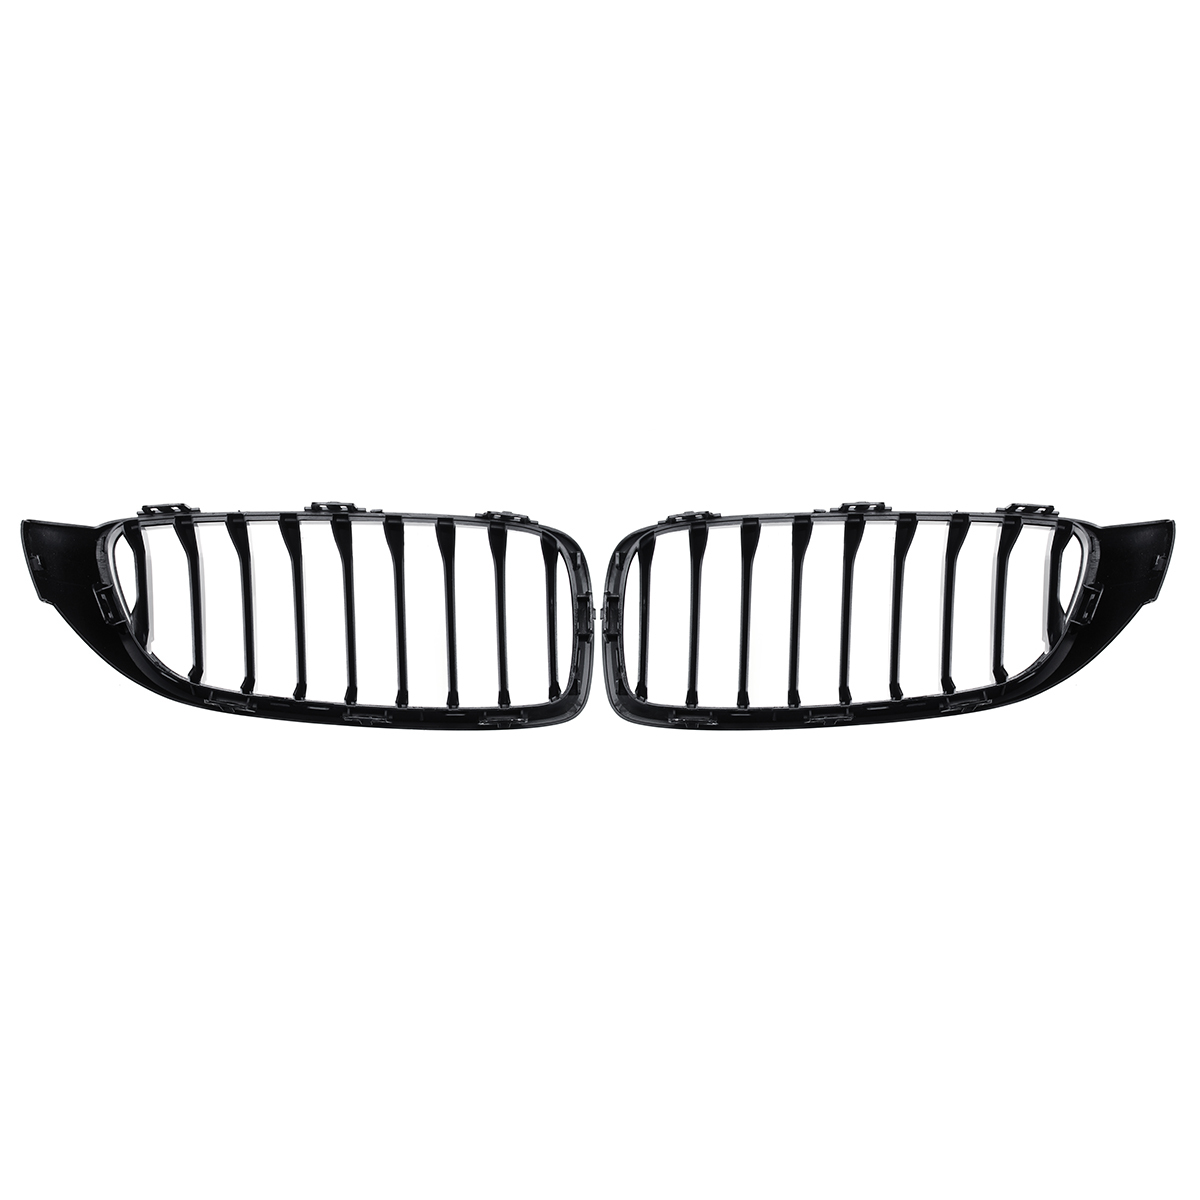 Car Gloss Black Kidney Grill Grille For BMW 4 Series F32 F33 F36 F82 Models Coupe 2